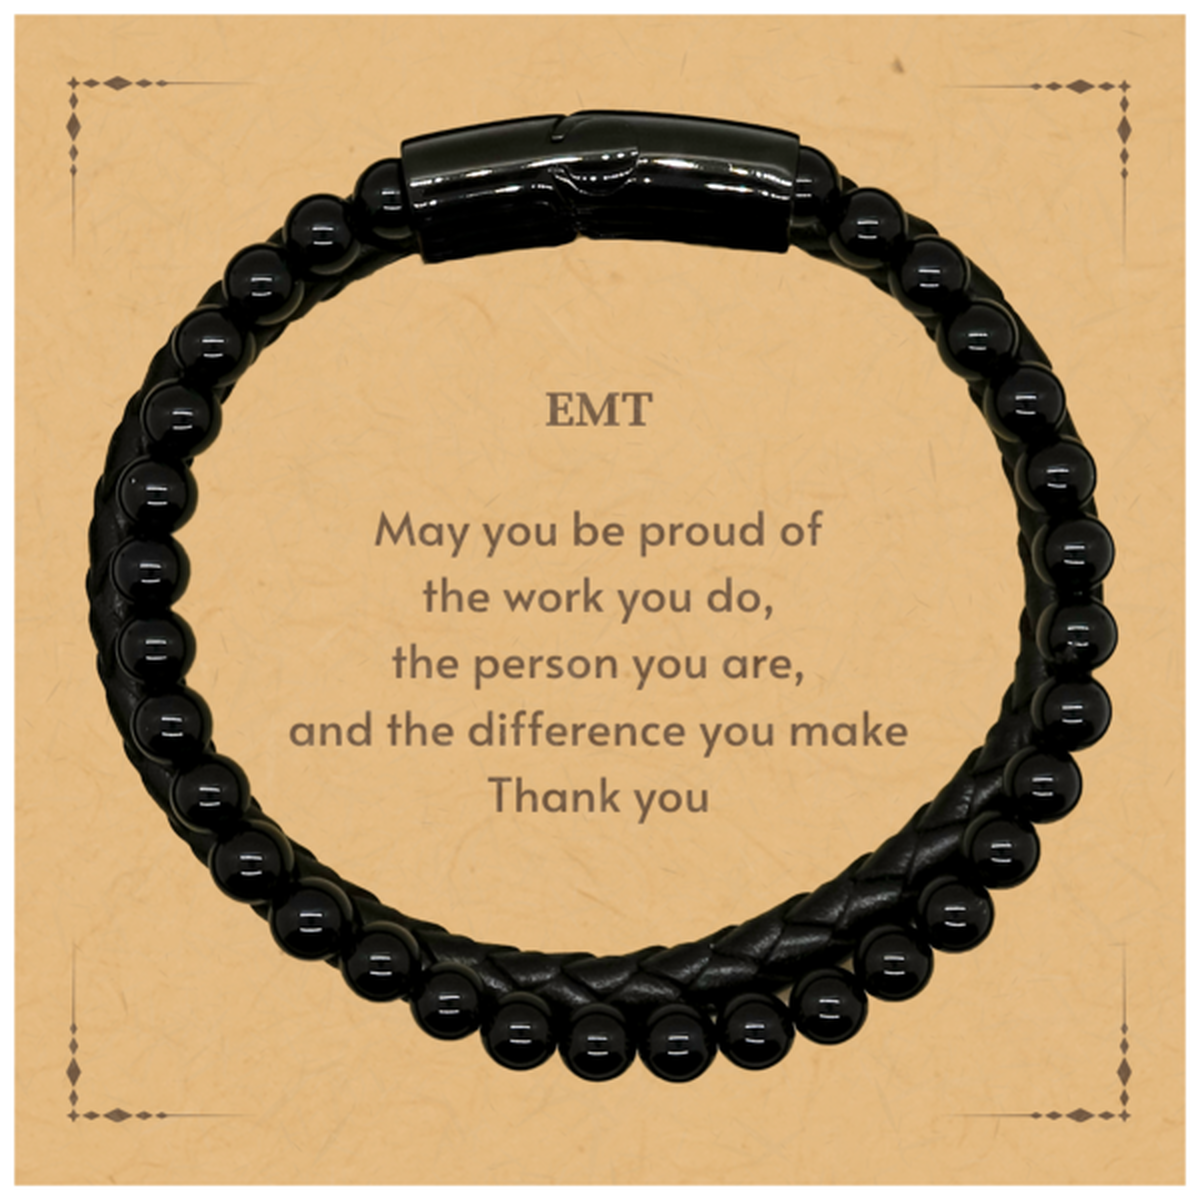 Heartwarming Stone Leather Bracelets Retirement Coworkers Gifts for EMT, EMT May You be proud of the work you do, the person you are Gifts for Boss Men Women Friends